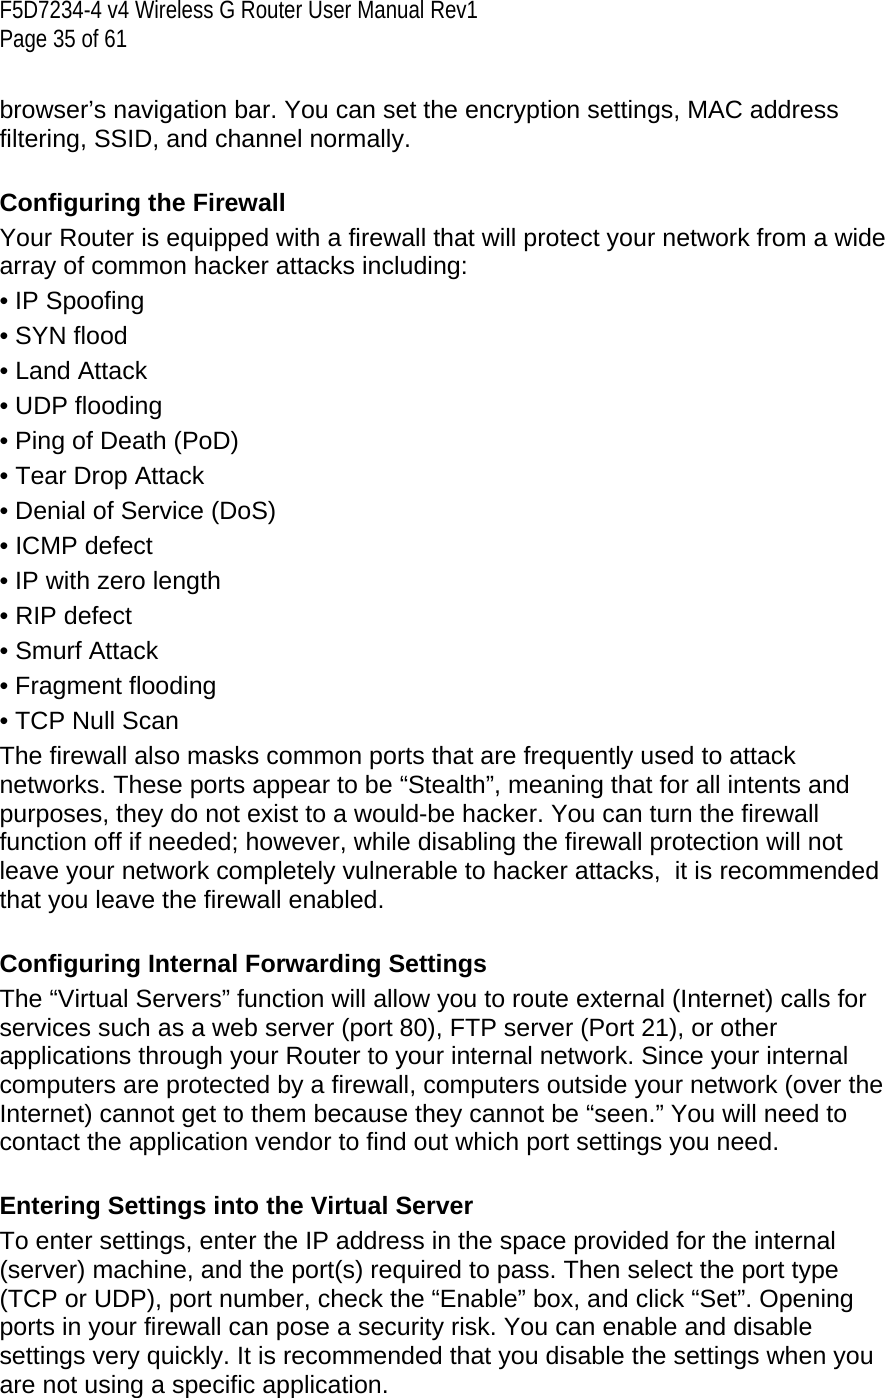 F5D7234-4 v4 Wireless G Router User Manual Rev1  Page 35 of 61   browser’s navigation bar. You can set the encryption settings, MAC address filtering, SSID, and channel normally.   Configuring the Firewall Your Router is equipped with a firewall that will protect your network from a wide array of common hacker attacks including: • IP Spoofing • SYN flood • Land Attack • UDP flooding • Ping of Death (PoD) • Tear Drop Attack • Denial of Service (DoS)  • ICMP defect • IP with zero length  • RIP defect • Smurf Attack • Fragment flooding • TCP Null Scan The firewall also masks common ports that are frequently used to attack networks. These ports appear to be “Stealth”, meaning that for all intents and purposes, they do not exist to a would-be hacker. You can turn the firewall function off if needed; however, while disabling the firewall protection will not leave your network completely vulnerable to hacker attacks,  it is recommended that you leave the firewall enabled.  Configuring Internal Forwarding Settings The “Virtual Servers” function will allow you to route external (Internet) calls for services such as a web server (port 80), FTP server (Port 21), or other applications through your Router to your internal network. Since your internal computers are protected by a firewall, computers outside your network (over the Internet) cannot get to them because they cannot be “seen.” You will need to contact the application vendor to find out which port settings you need.  Entering Settings into the Virtual Server To enter settings, enter the IP address in the space provided for the internal (server) machine, and the port(s) required to pass. Then select the port type (TCP or UDP), port number, check the “Enable” box, and click “Set”. Opening ports in your firewall can pose a security risk. You can enable and disable settings very quickly. It is recommended that you disable the settings when you are not using a specific application.  